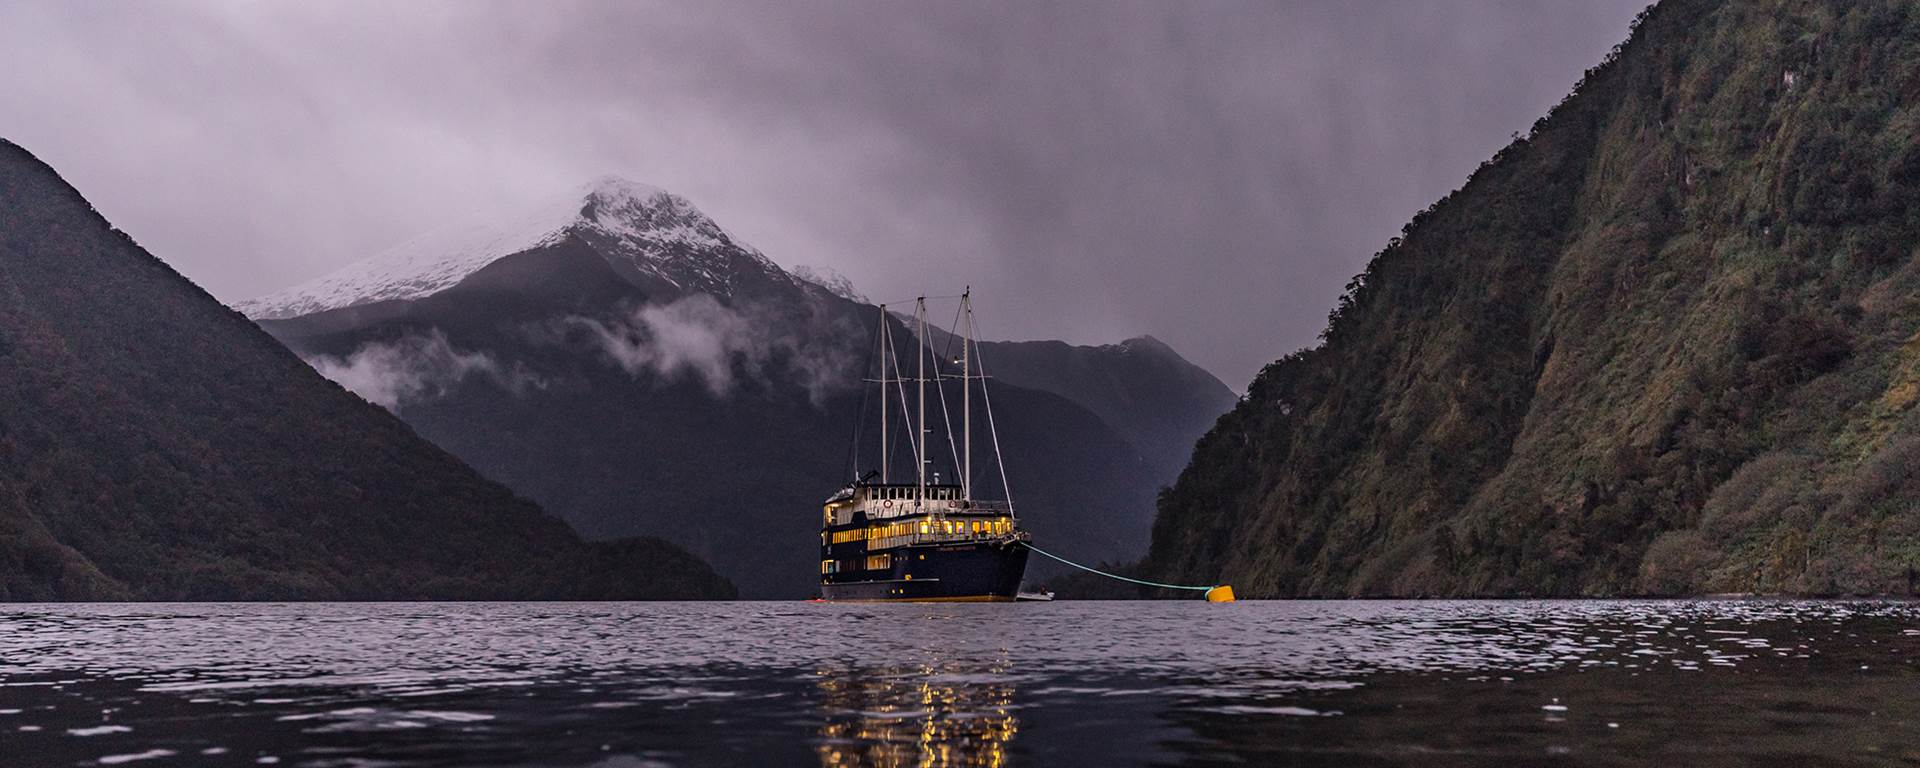 Boat docks of the night in Doubtful Sound with snow-capped mountain